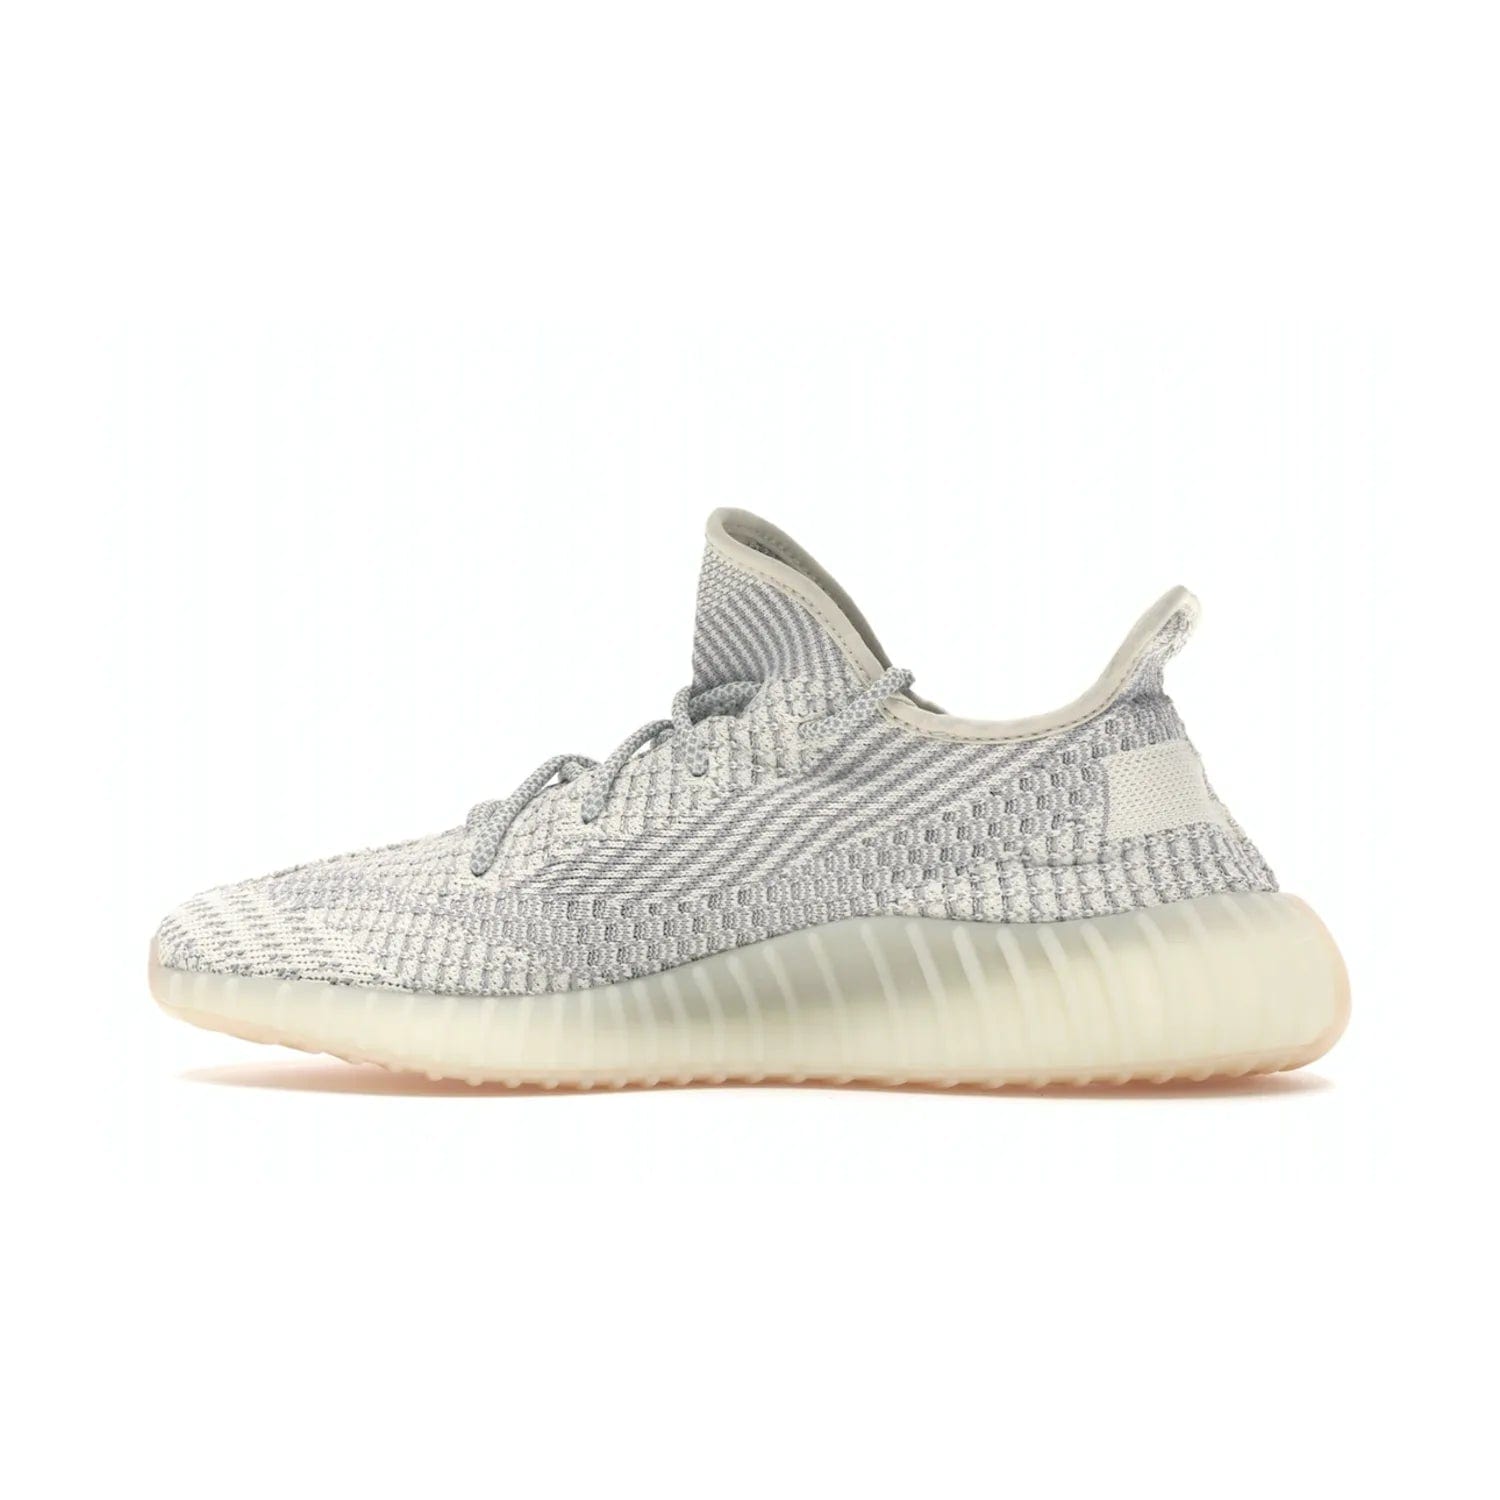 adidas Yeezy Boost 350 V2 Lundmark (Non Reflective) - Image 20 - Only at www.BallersClubKickz.com - Shop the exclusive adidas Yeezy Boost 350 V2 Lundmark with a subtle summer color, mesh upper, white-to-cream transitional midsole, light tan outsole, and pink middle stripe. Comfort and style come together in this perfect summer 350 V2. Released on July 11, 2019.